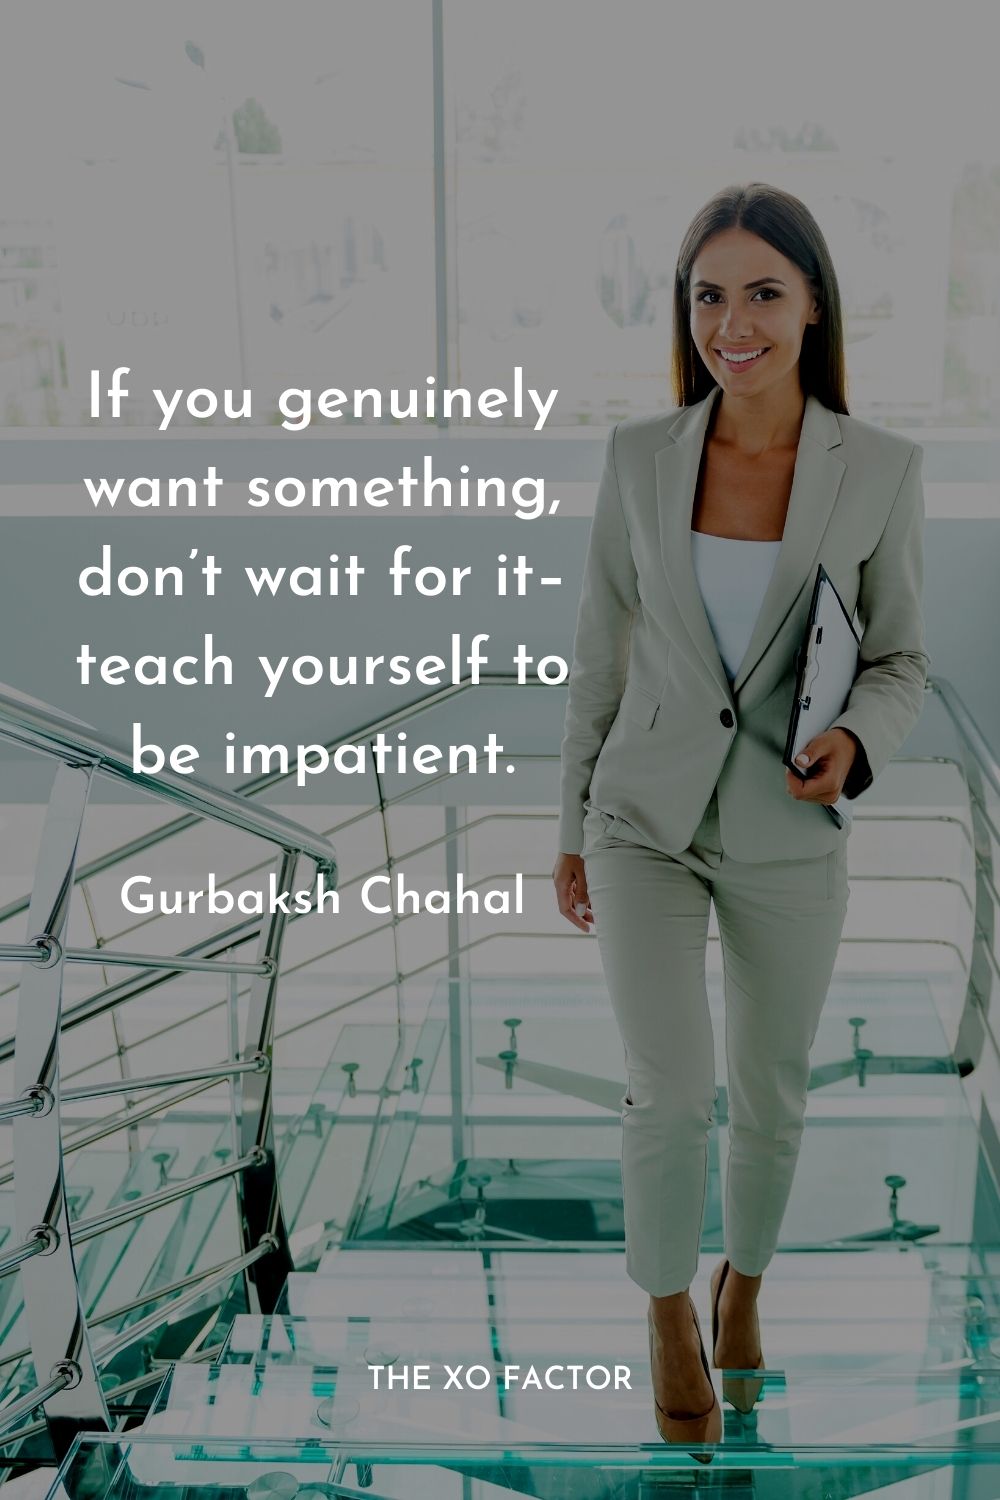 If you genuinely want something, don’t wait for it–teach yourself to be impatient.